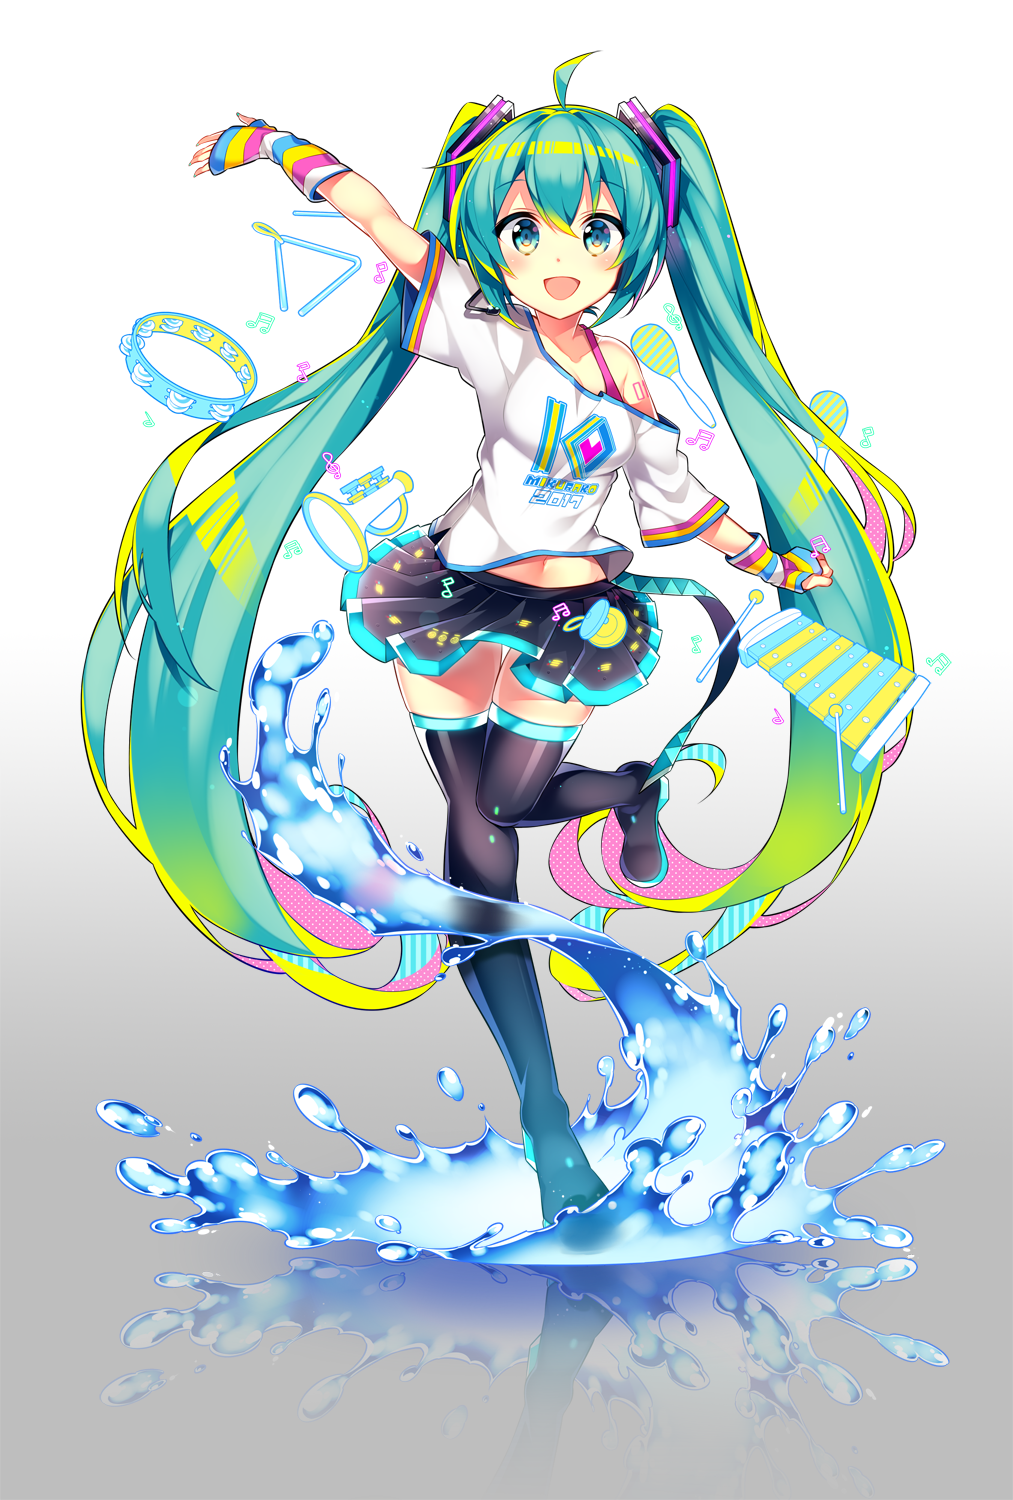 1girl aqua_eyes aqua_hair arm_up boots full_body hatsune_miku headset highres kurisu_sai long_hair looking_at_viewer navel open_mouth skirt solo splashing standing standing_on_one_leg thigh-highs thigh_boots twintails very_long_hair vocaloid water white_background